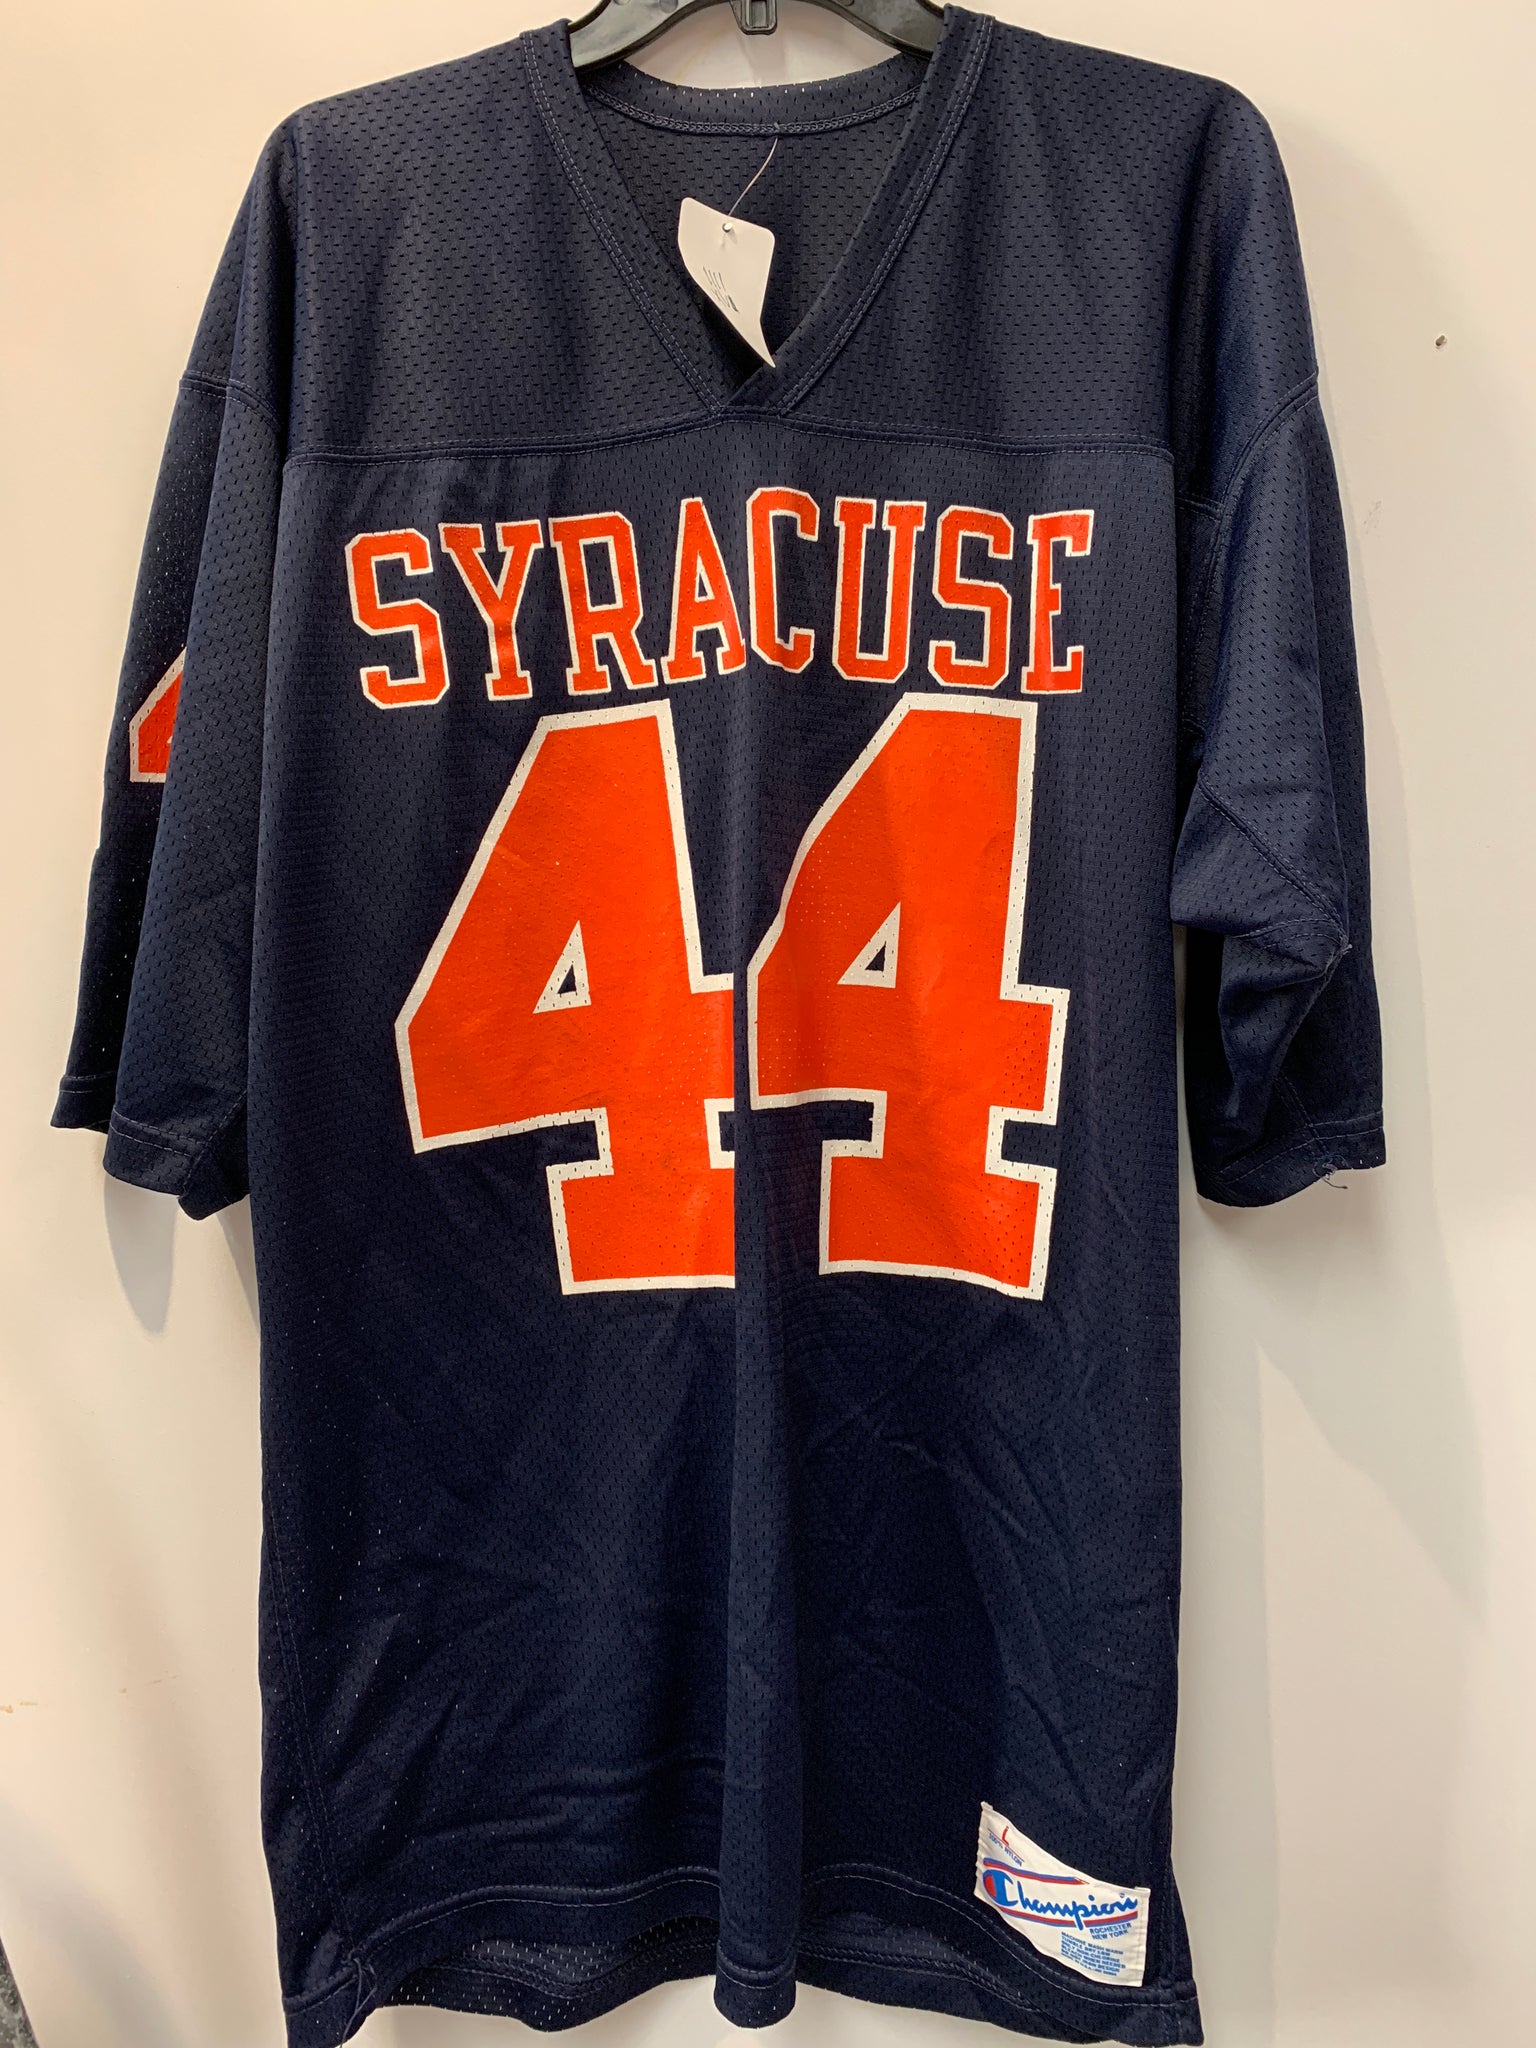 Vintage Champion Syracuse Football Jersey #44 Large Made in